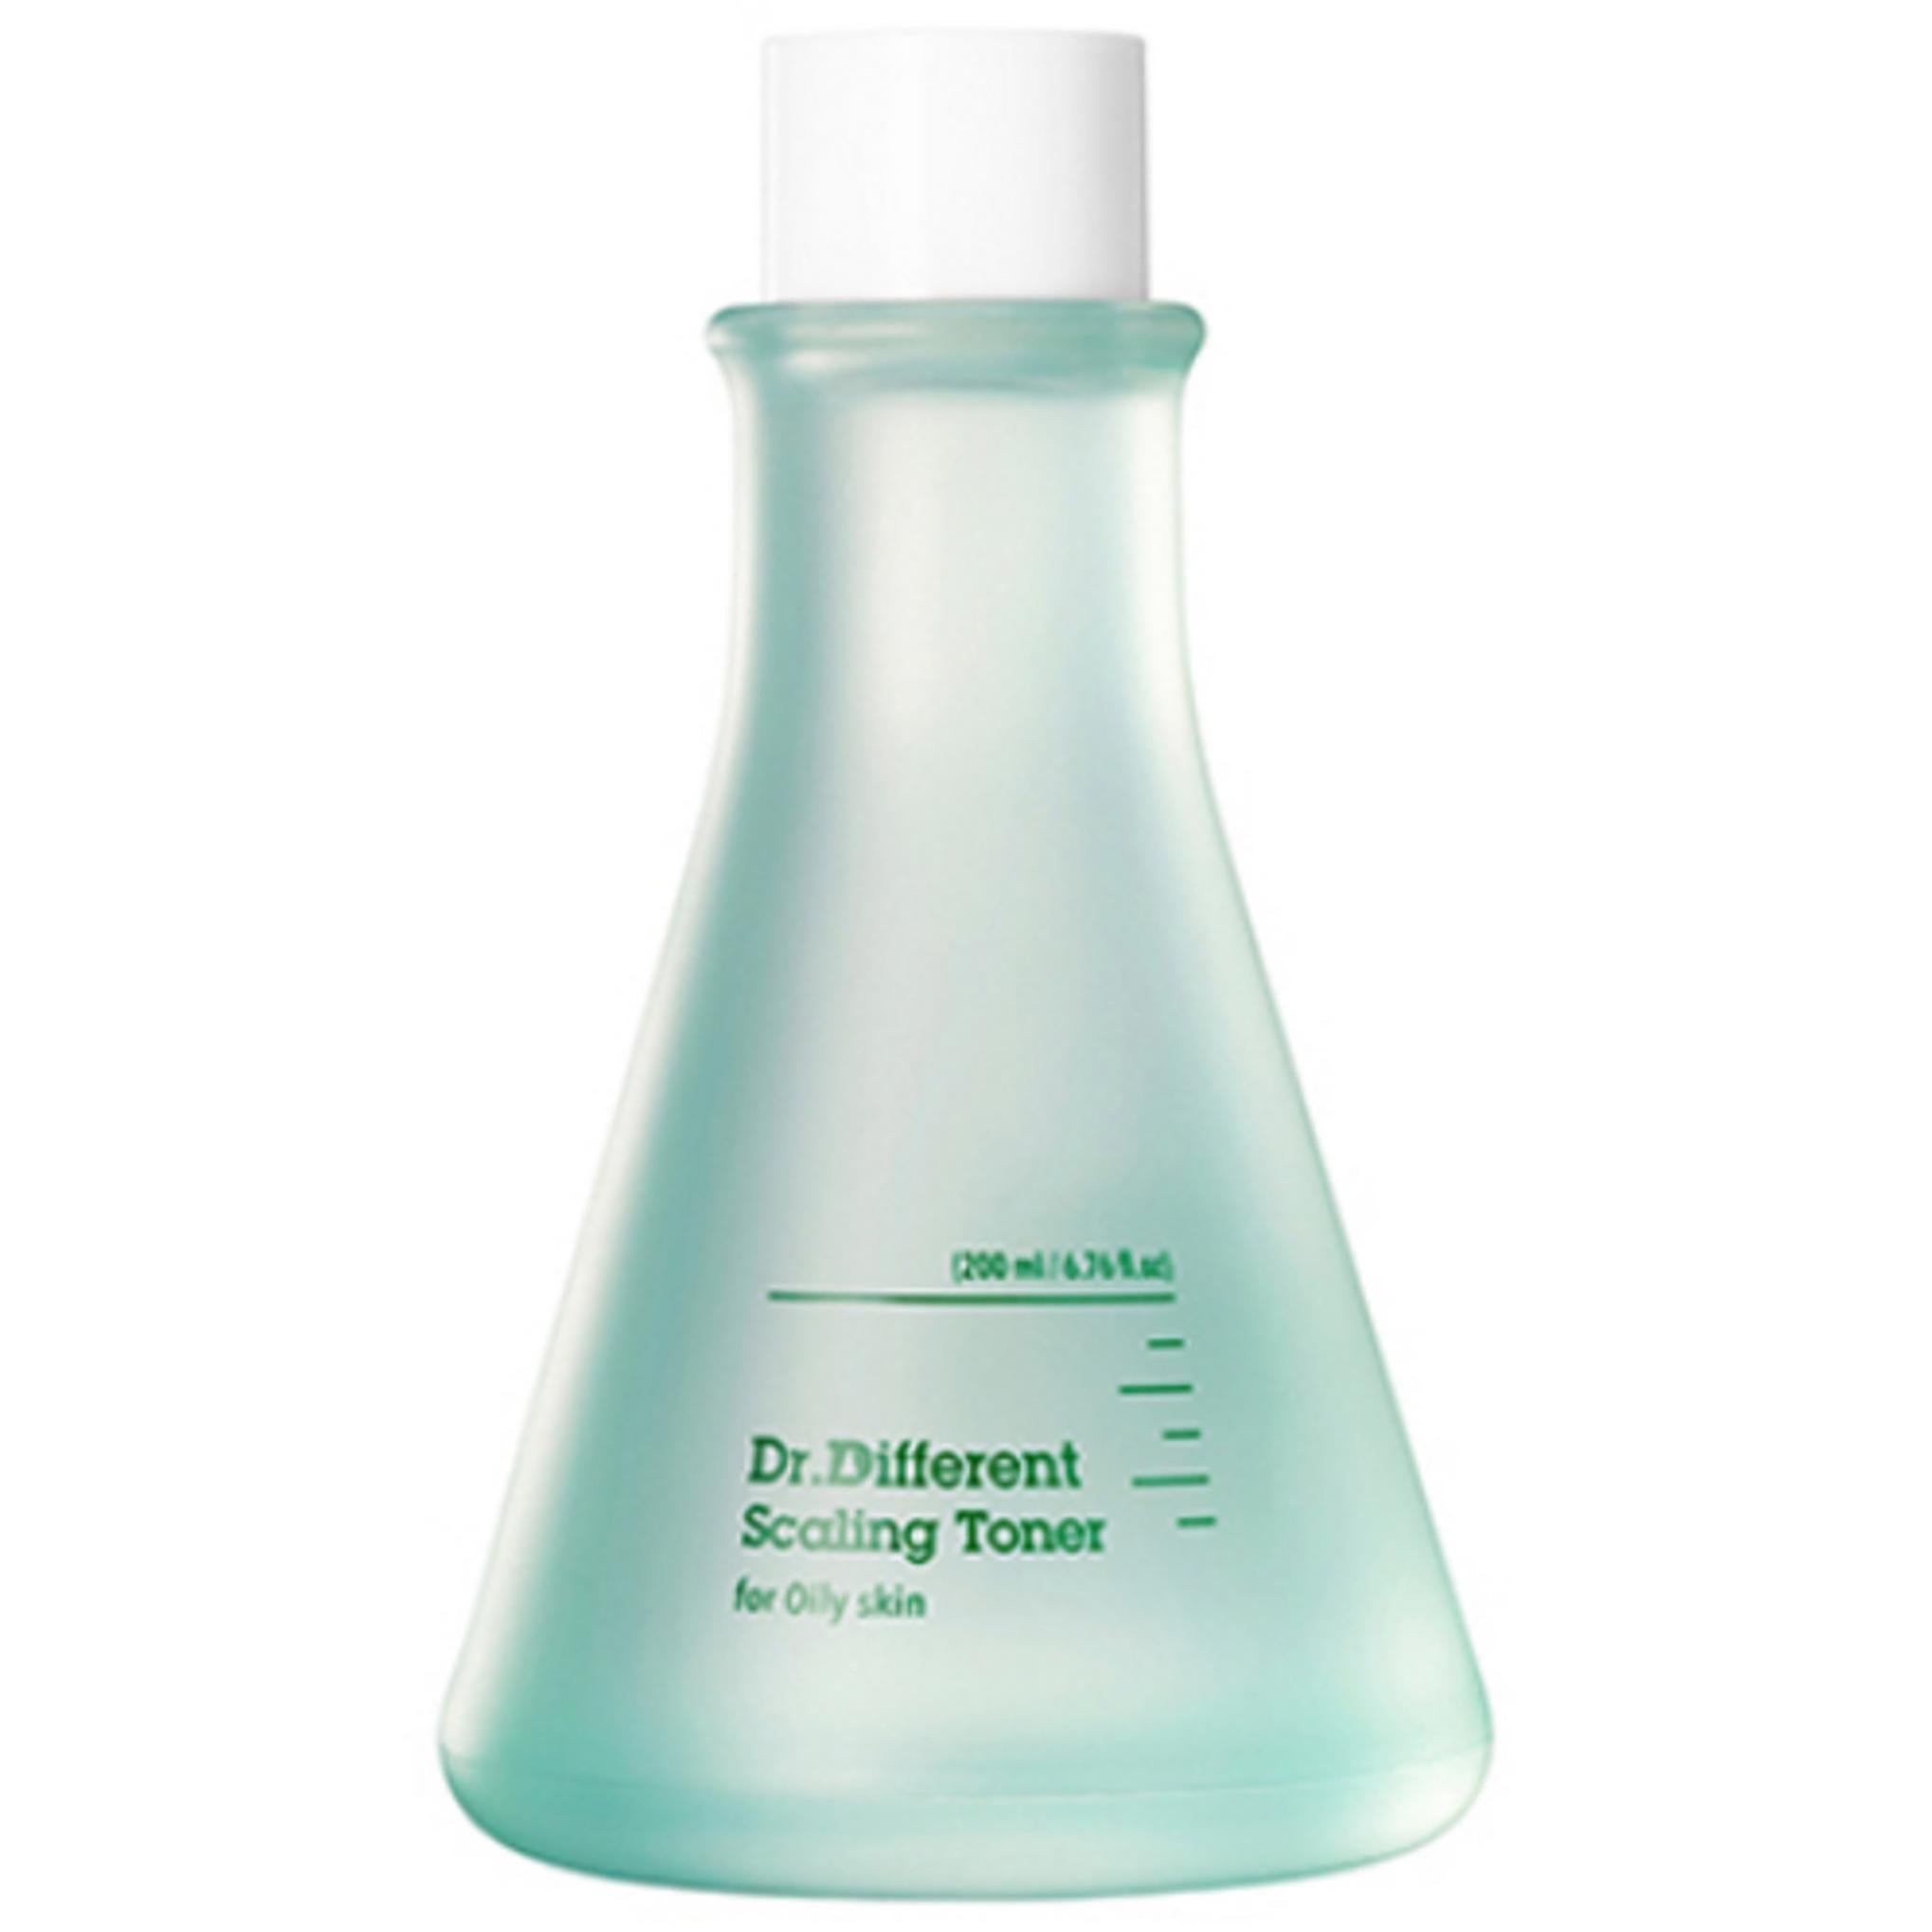 Dr. Different Scaling Toner